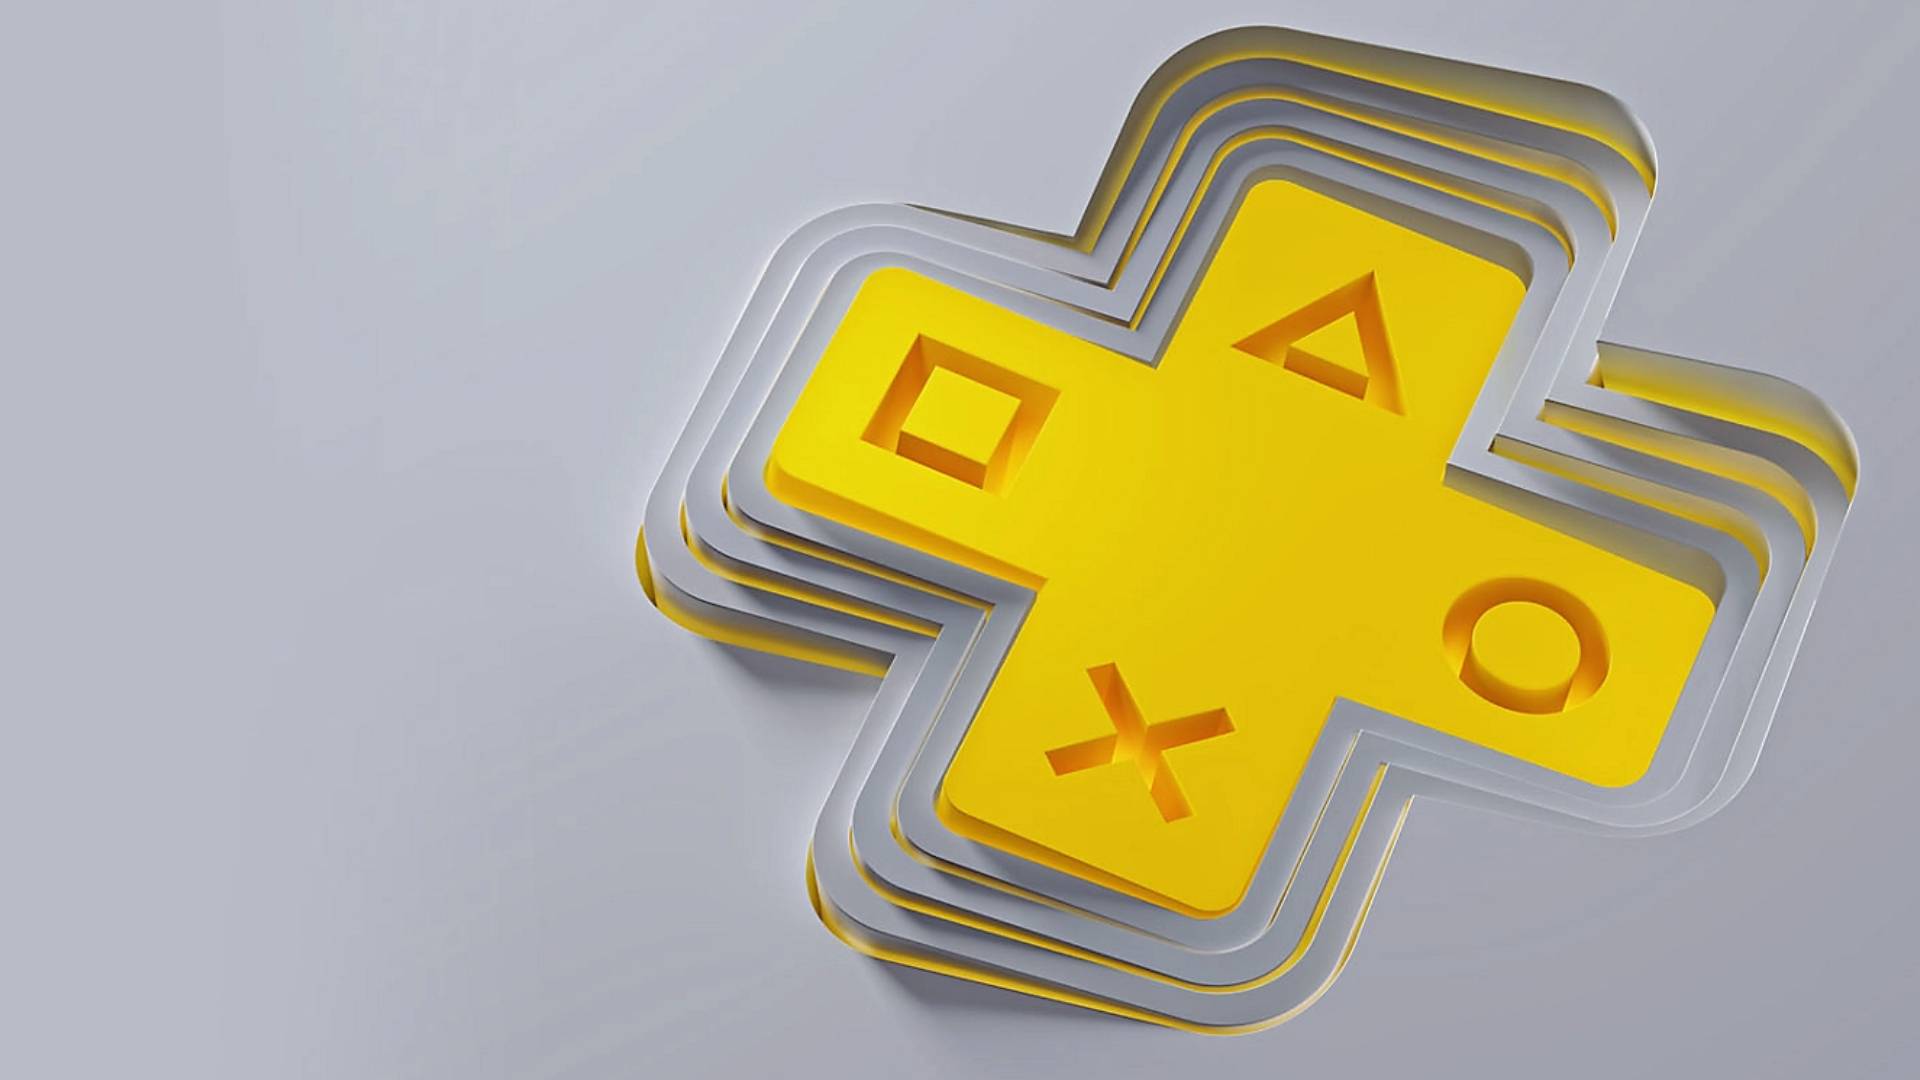 The PS Plus logo on a grey background